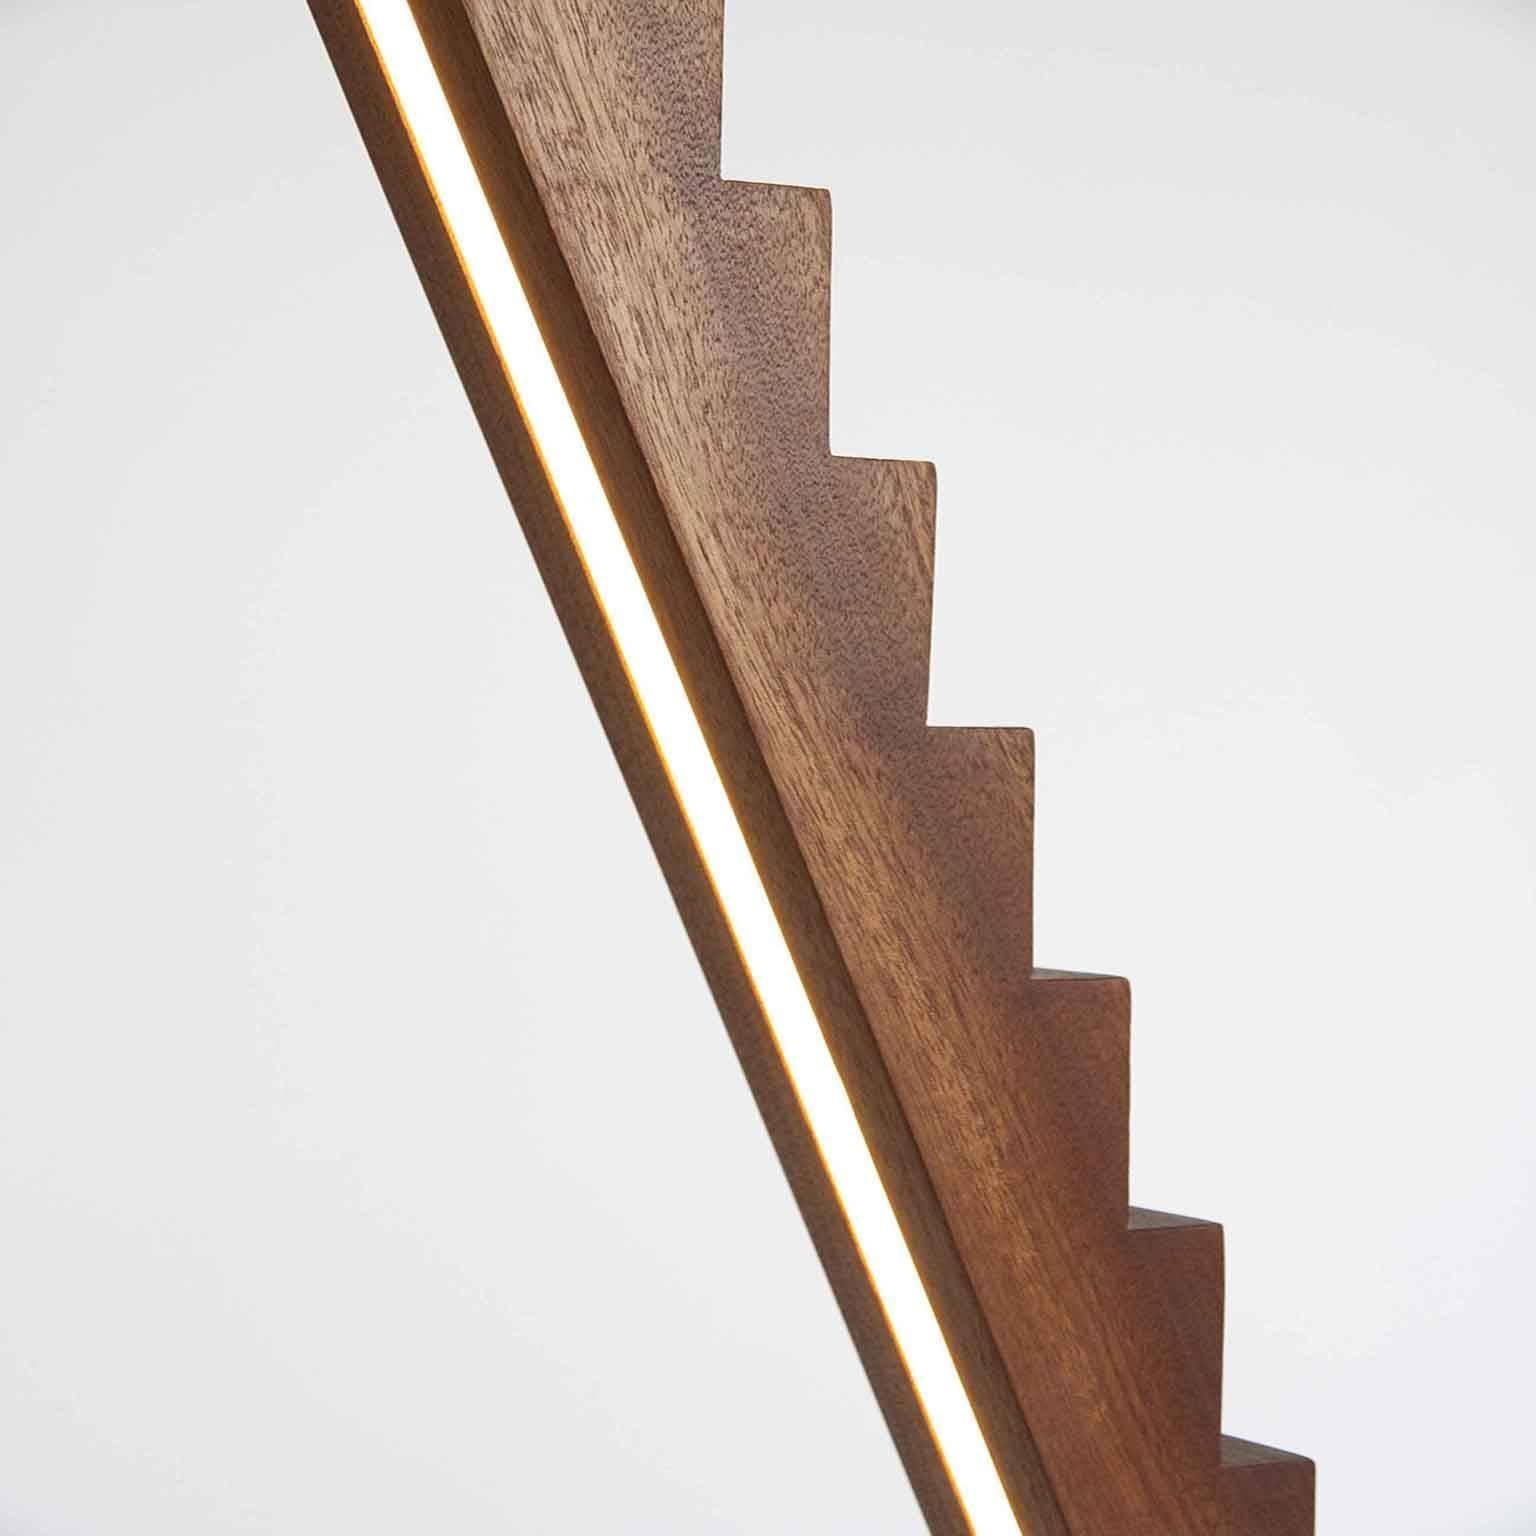 Fort Makers' Sapele Stepped Line Light is made in Brooklyn by Noah Spencer. This sculptural LED light juxtaposes hard lines with soft reflected light and emits an ambient aura. The lifespan of an LED strip is approximately 50,000 hours.
12 Volts LED